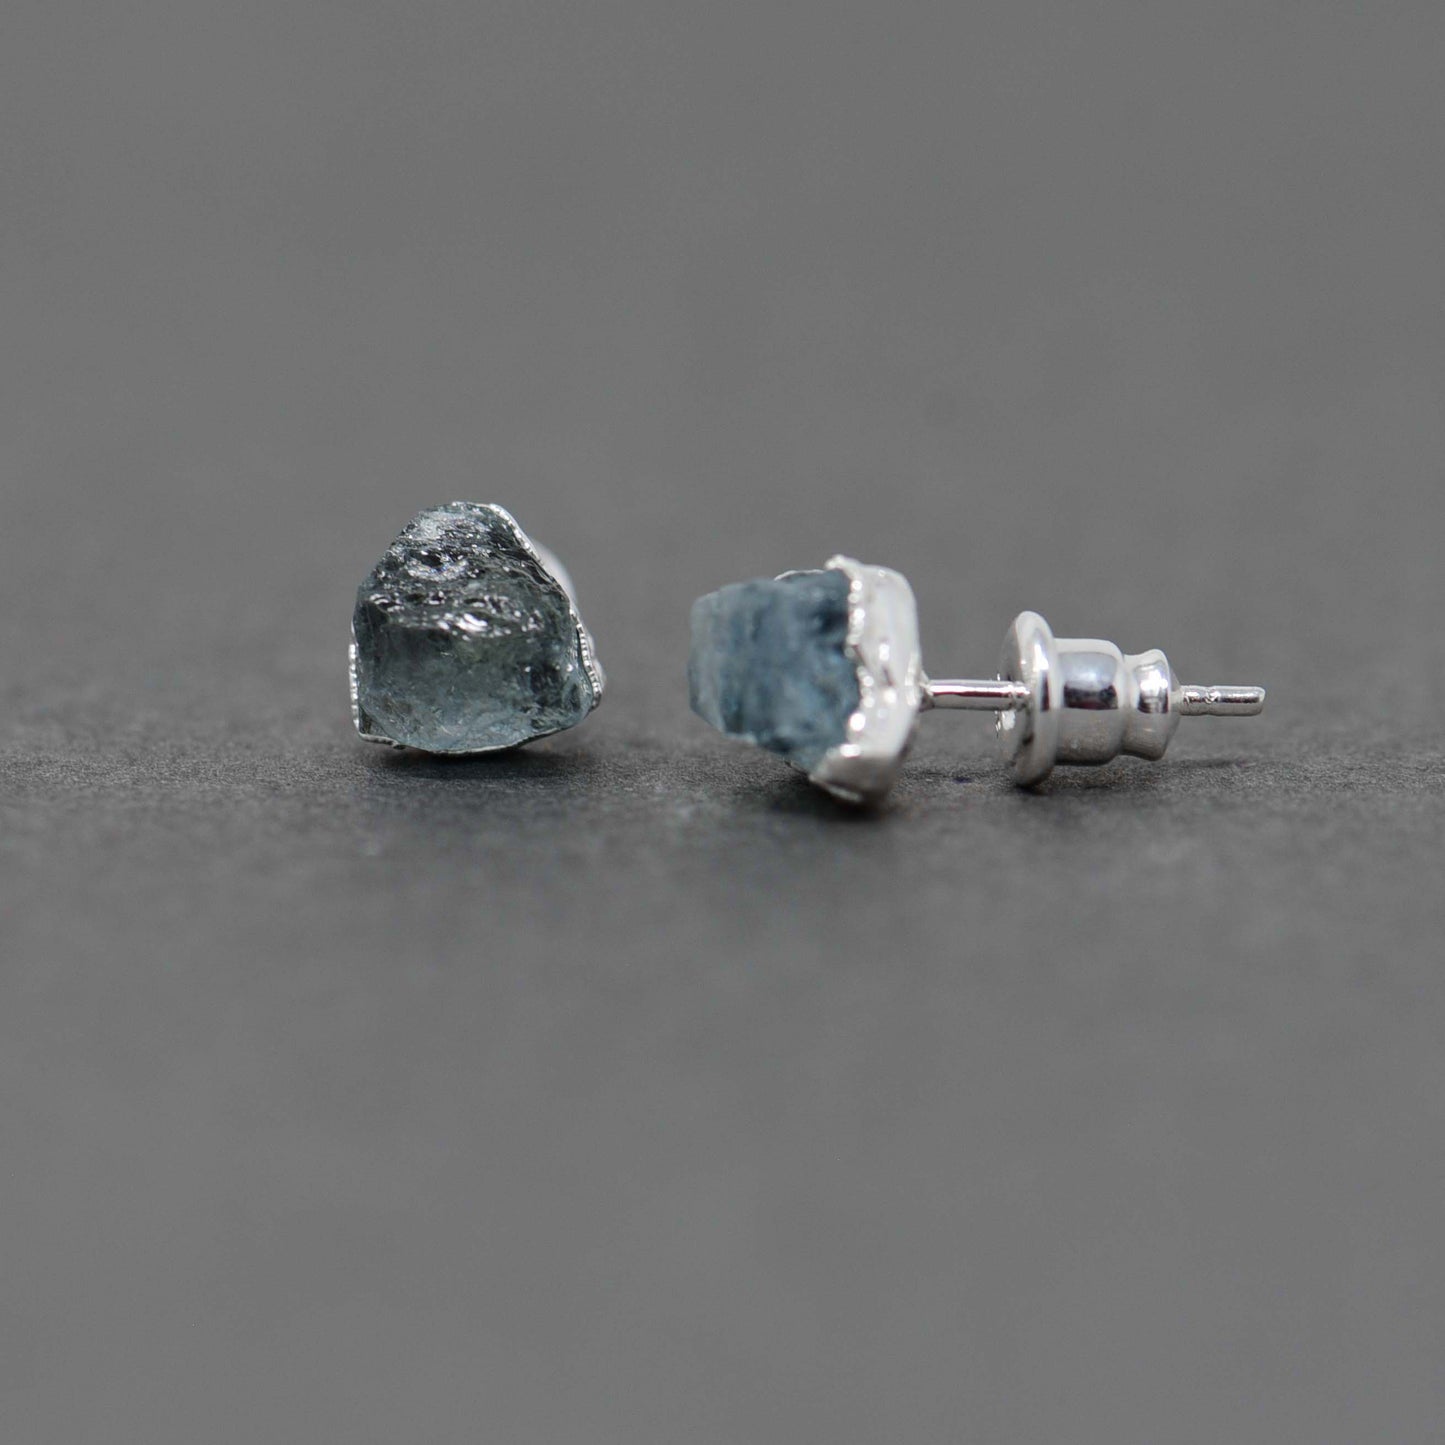 Silver stud earrings with Rough Aquamarine